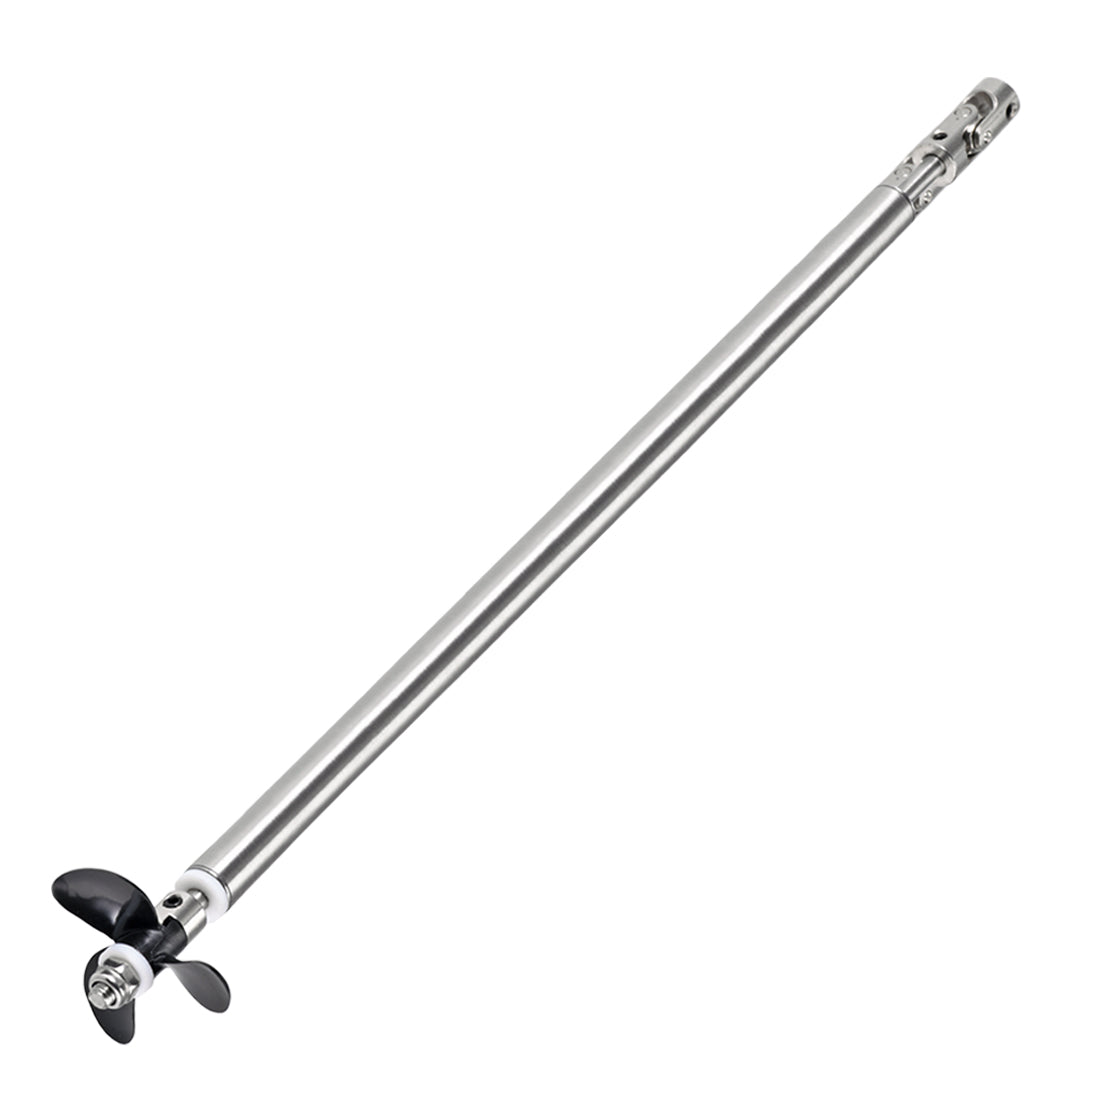 uxcell Uxcell 4mm Drive Shaft w Propeller and Universal Joint for RC Boat,  L250mm Shaft, L200mm Sleeve, D36mm Propeller, Fit for 3.17mm Motor Shaft